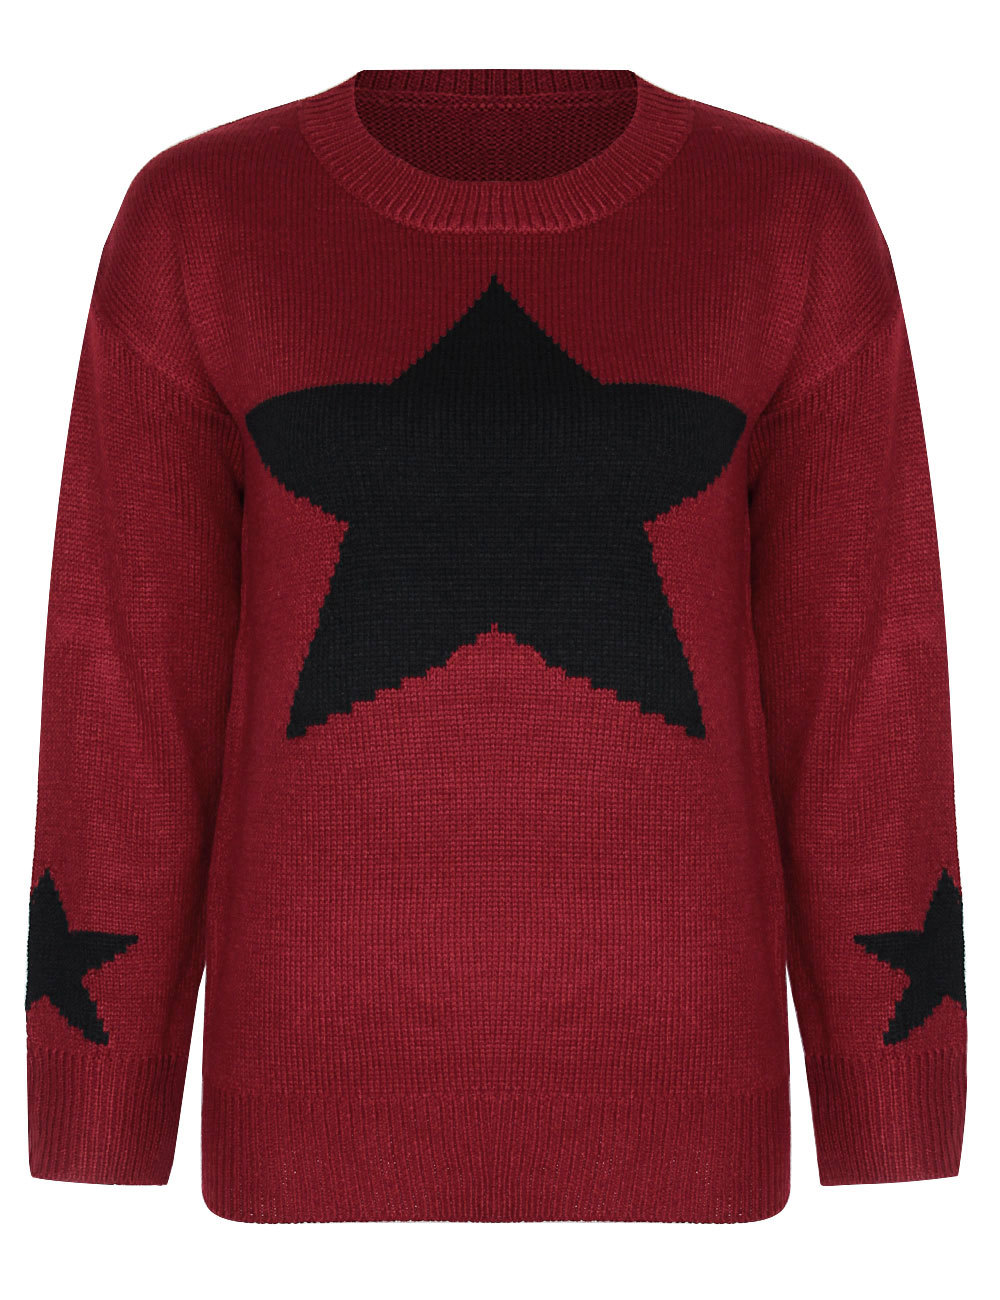 Red Star Pattern Knitted Sweater